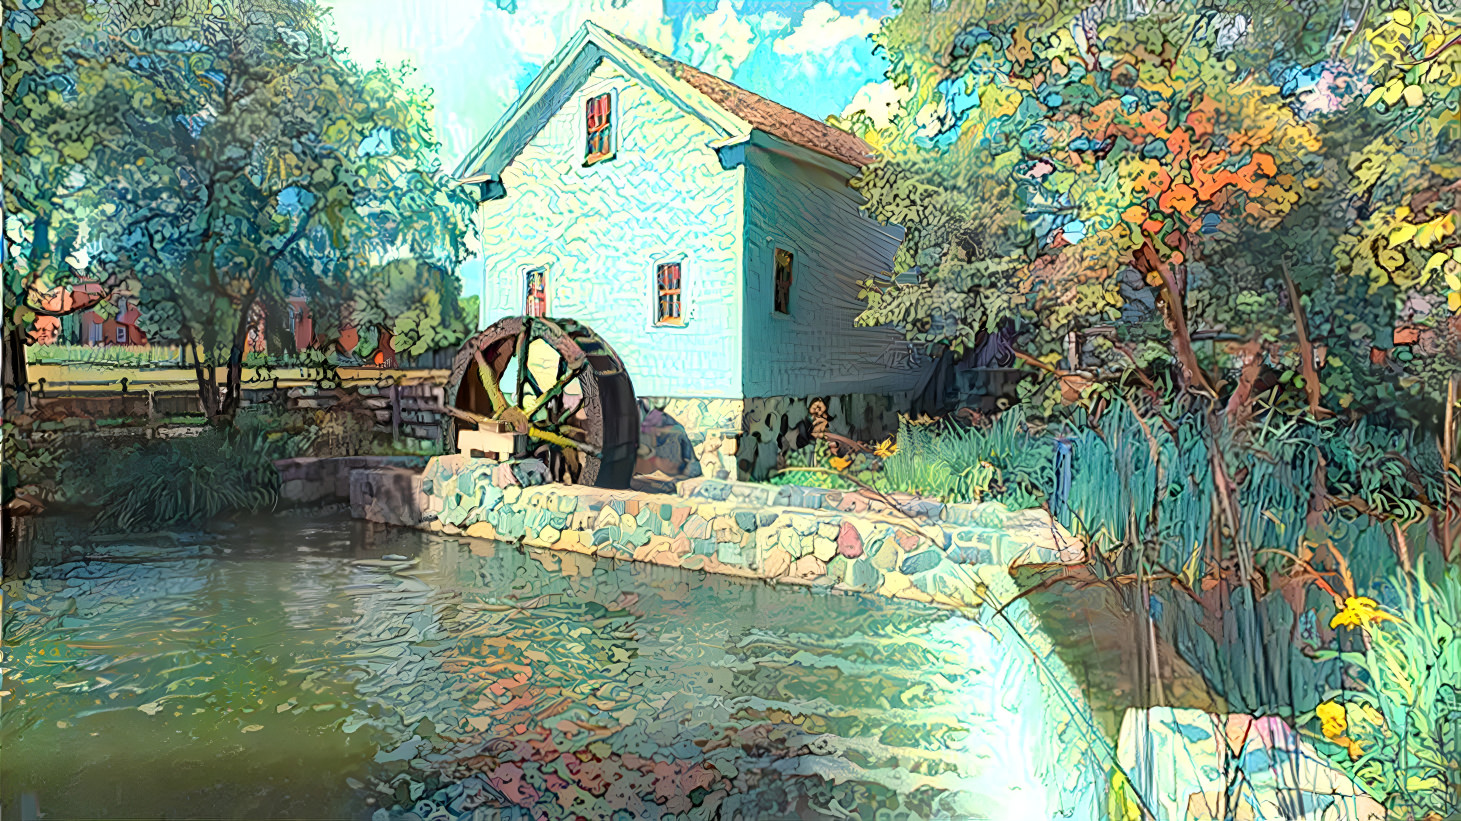 "Old Mill Dream"